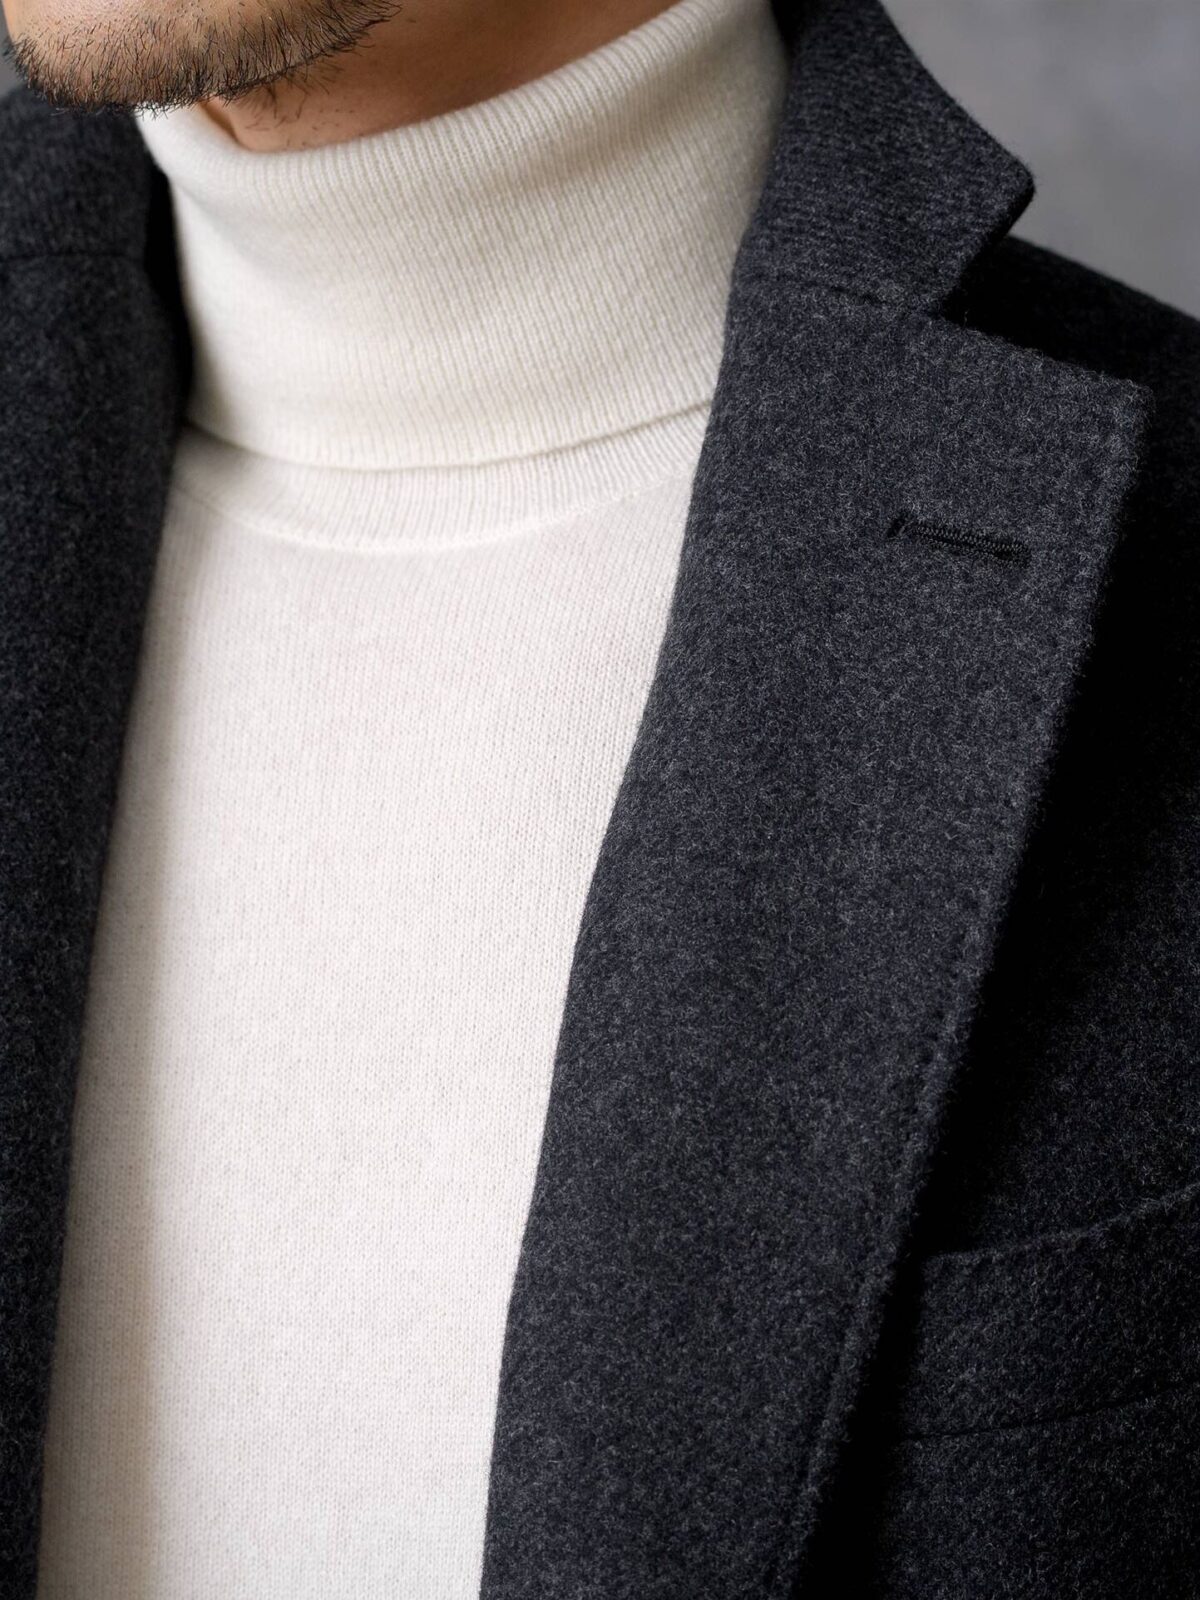 Bowery Charcoal Wool Unstructured Coat